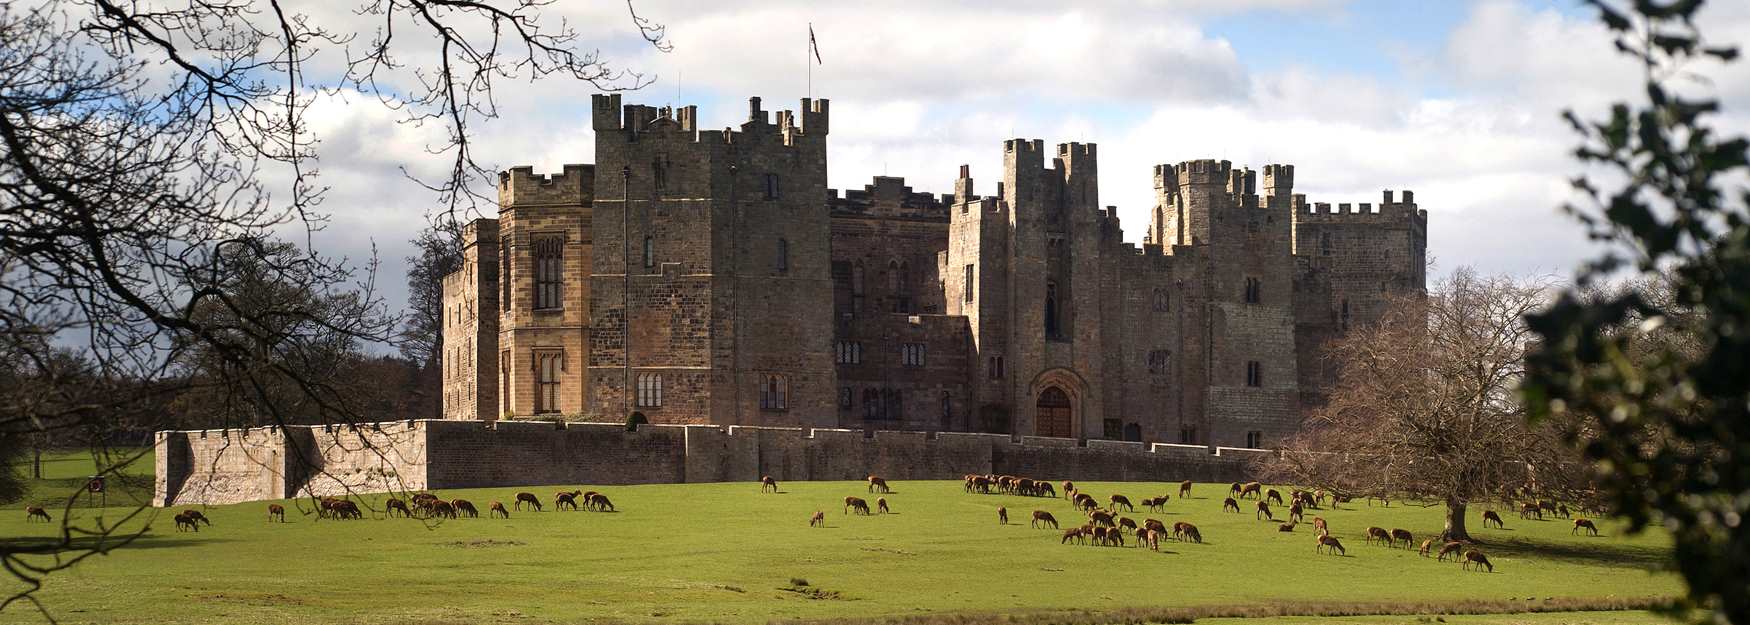 Raby castle and deer park